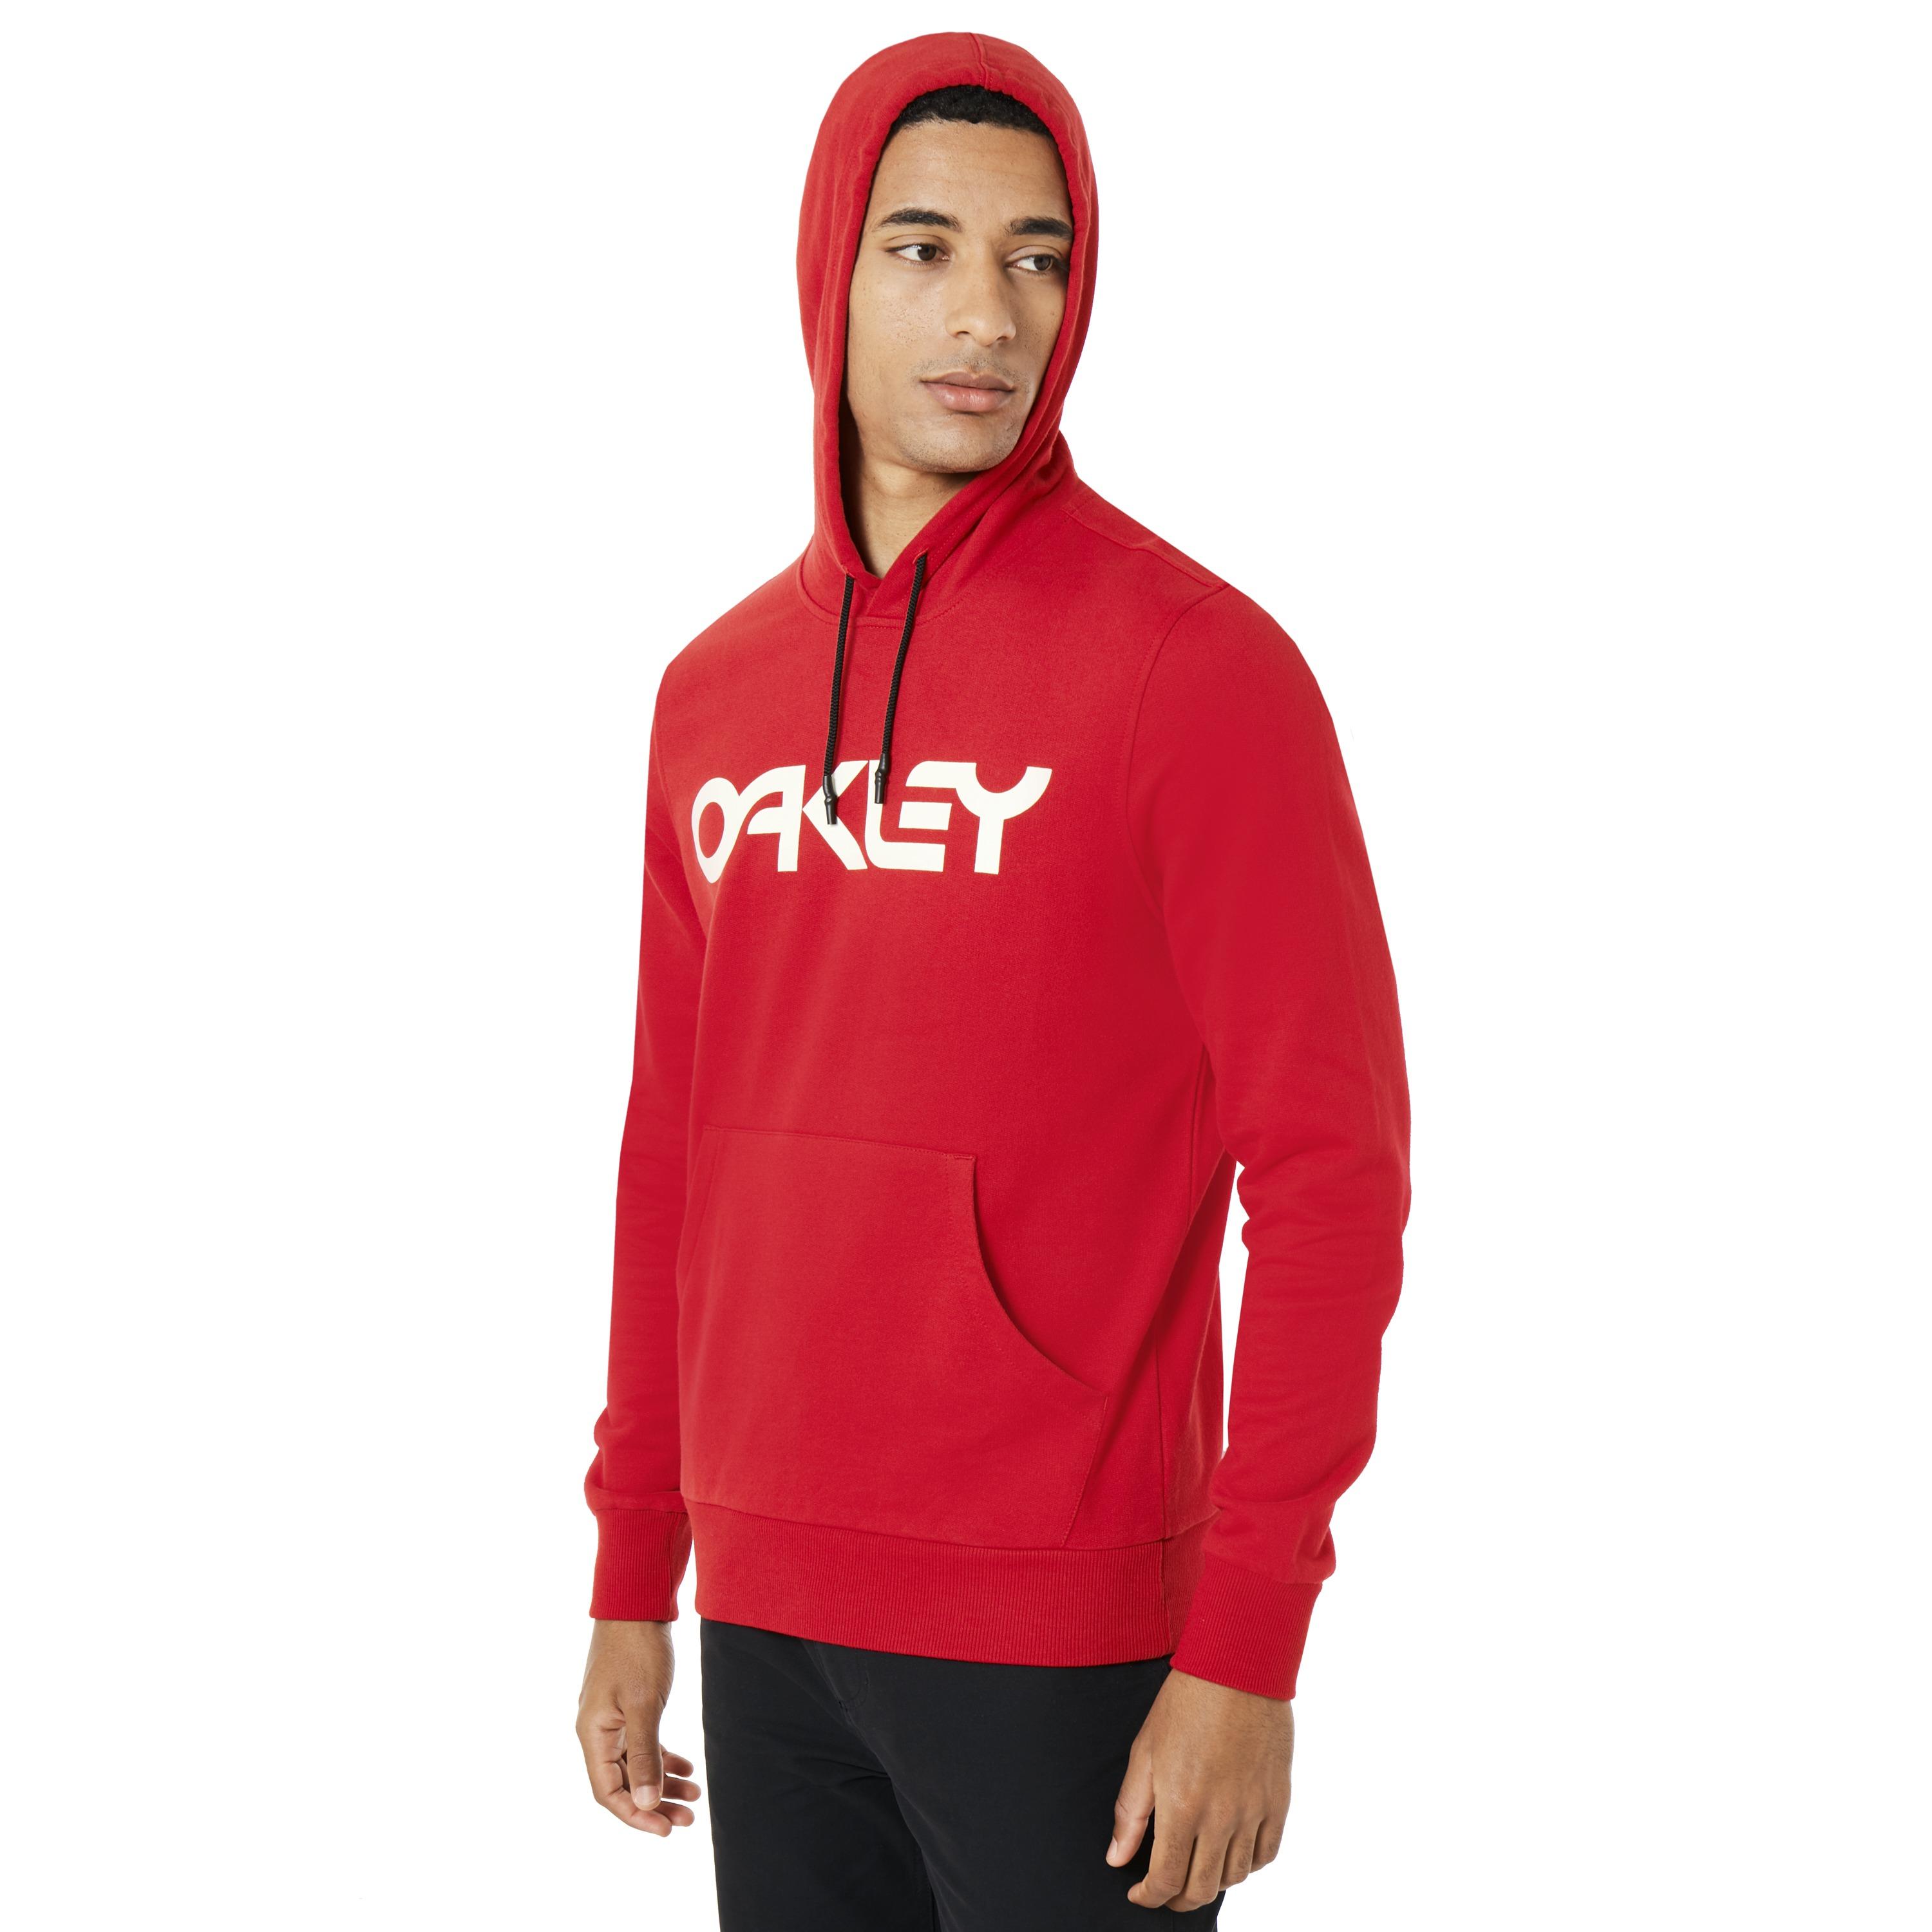 Oakley Cotton B1b Po Hoodie in Red for Men - Save 40% - Lyst